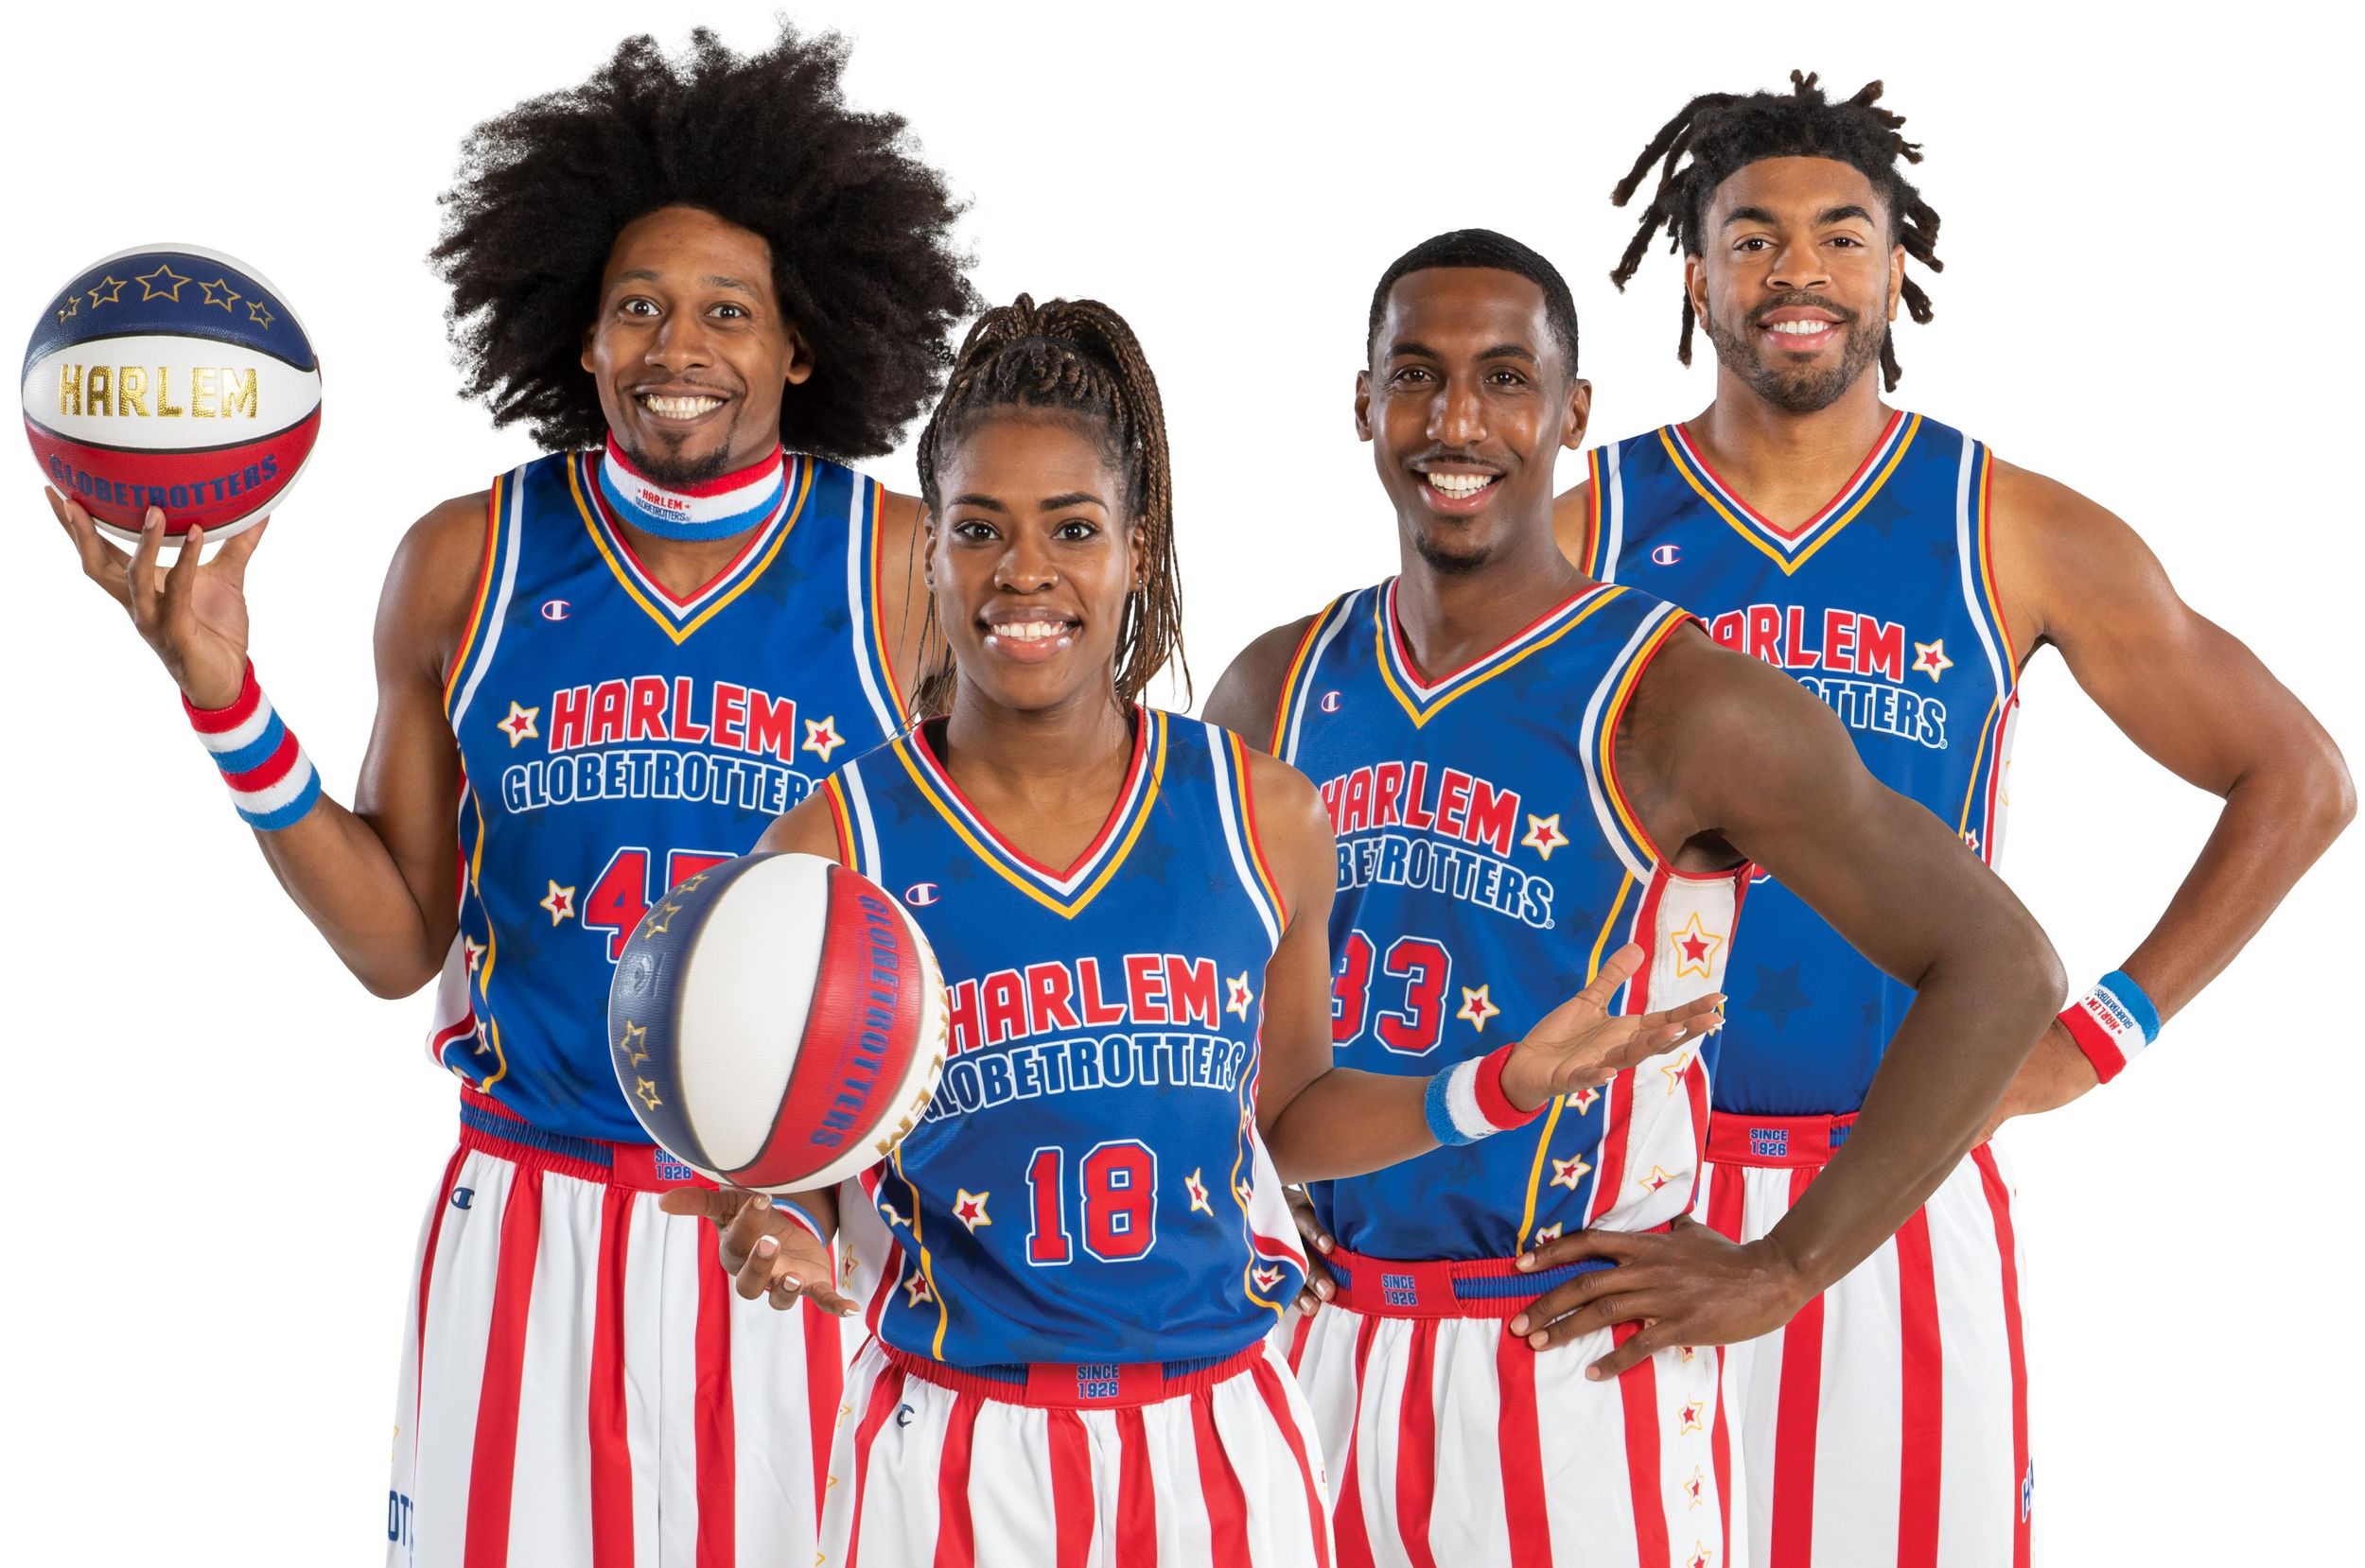 Ninety-one years of basketball fun with Harlem Globetrotters [video]